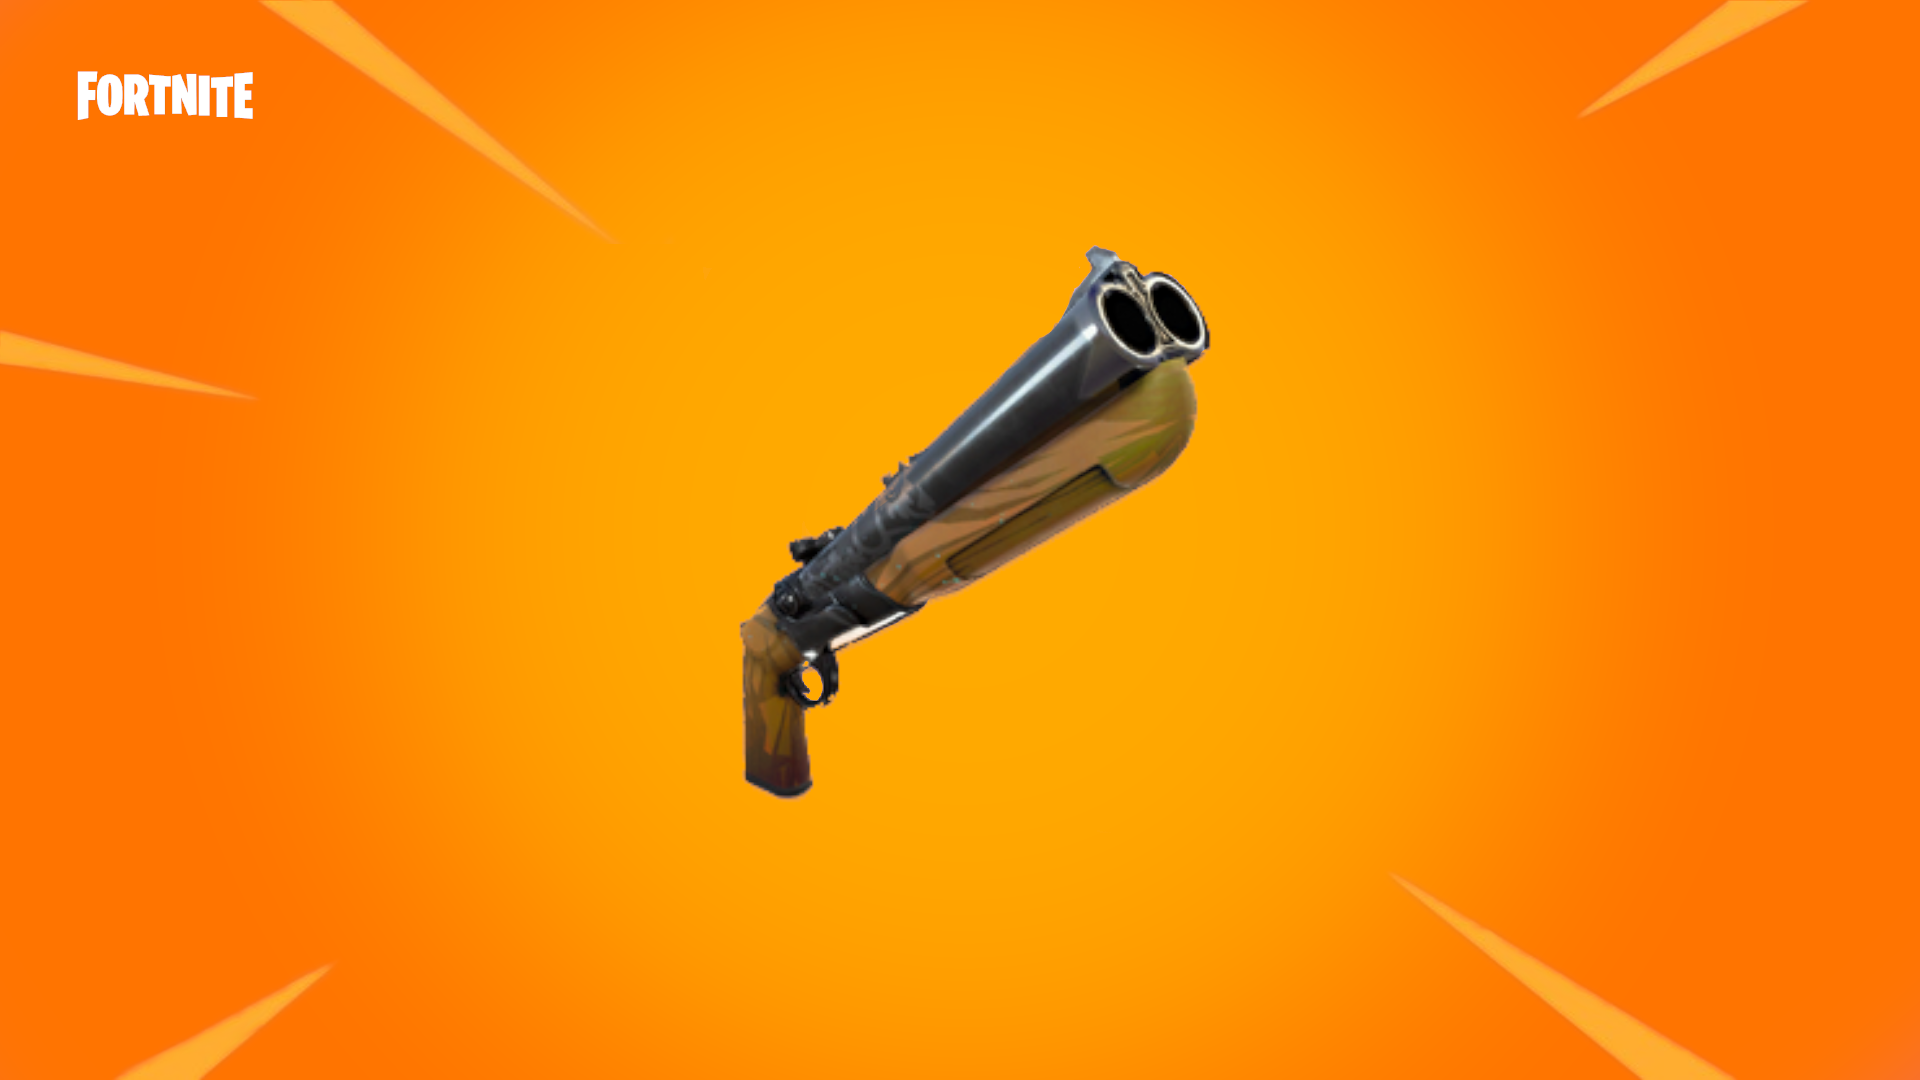 Tv And Movie News 10 Most Powerful Weapons In Fortnite And 10 That - this fortnite weapon comes as both epic a!   nd legendary variants however the legendary version is much better the legendary double barrel shotgun is great